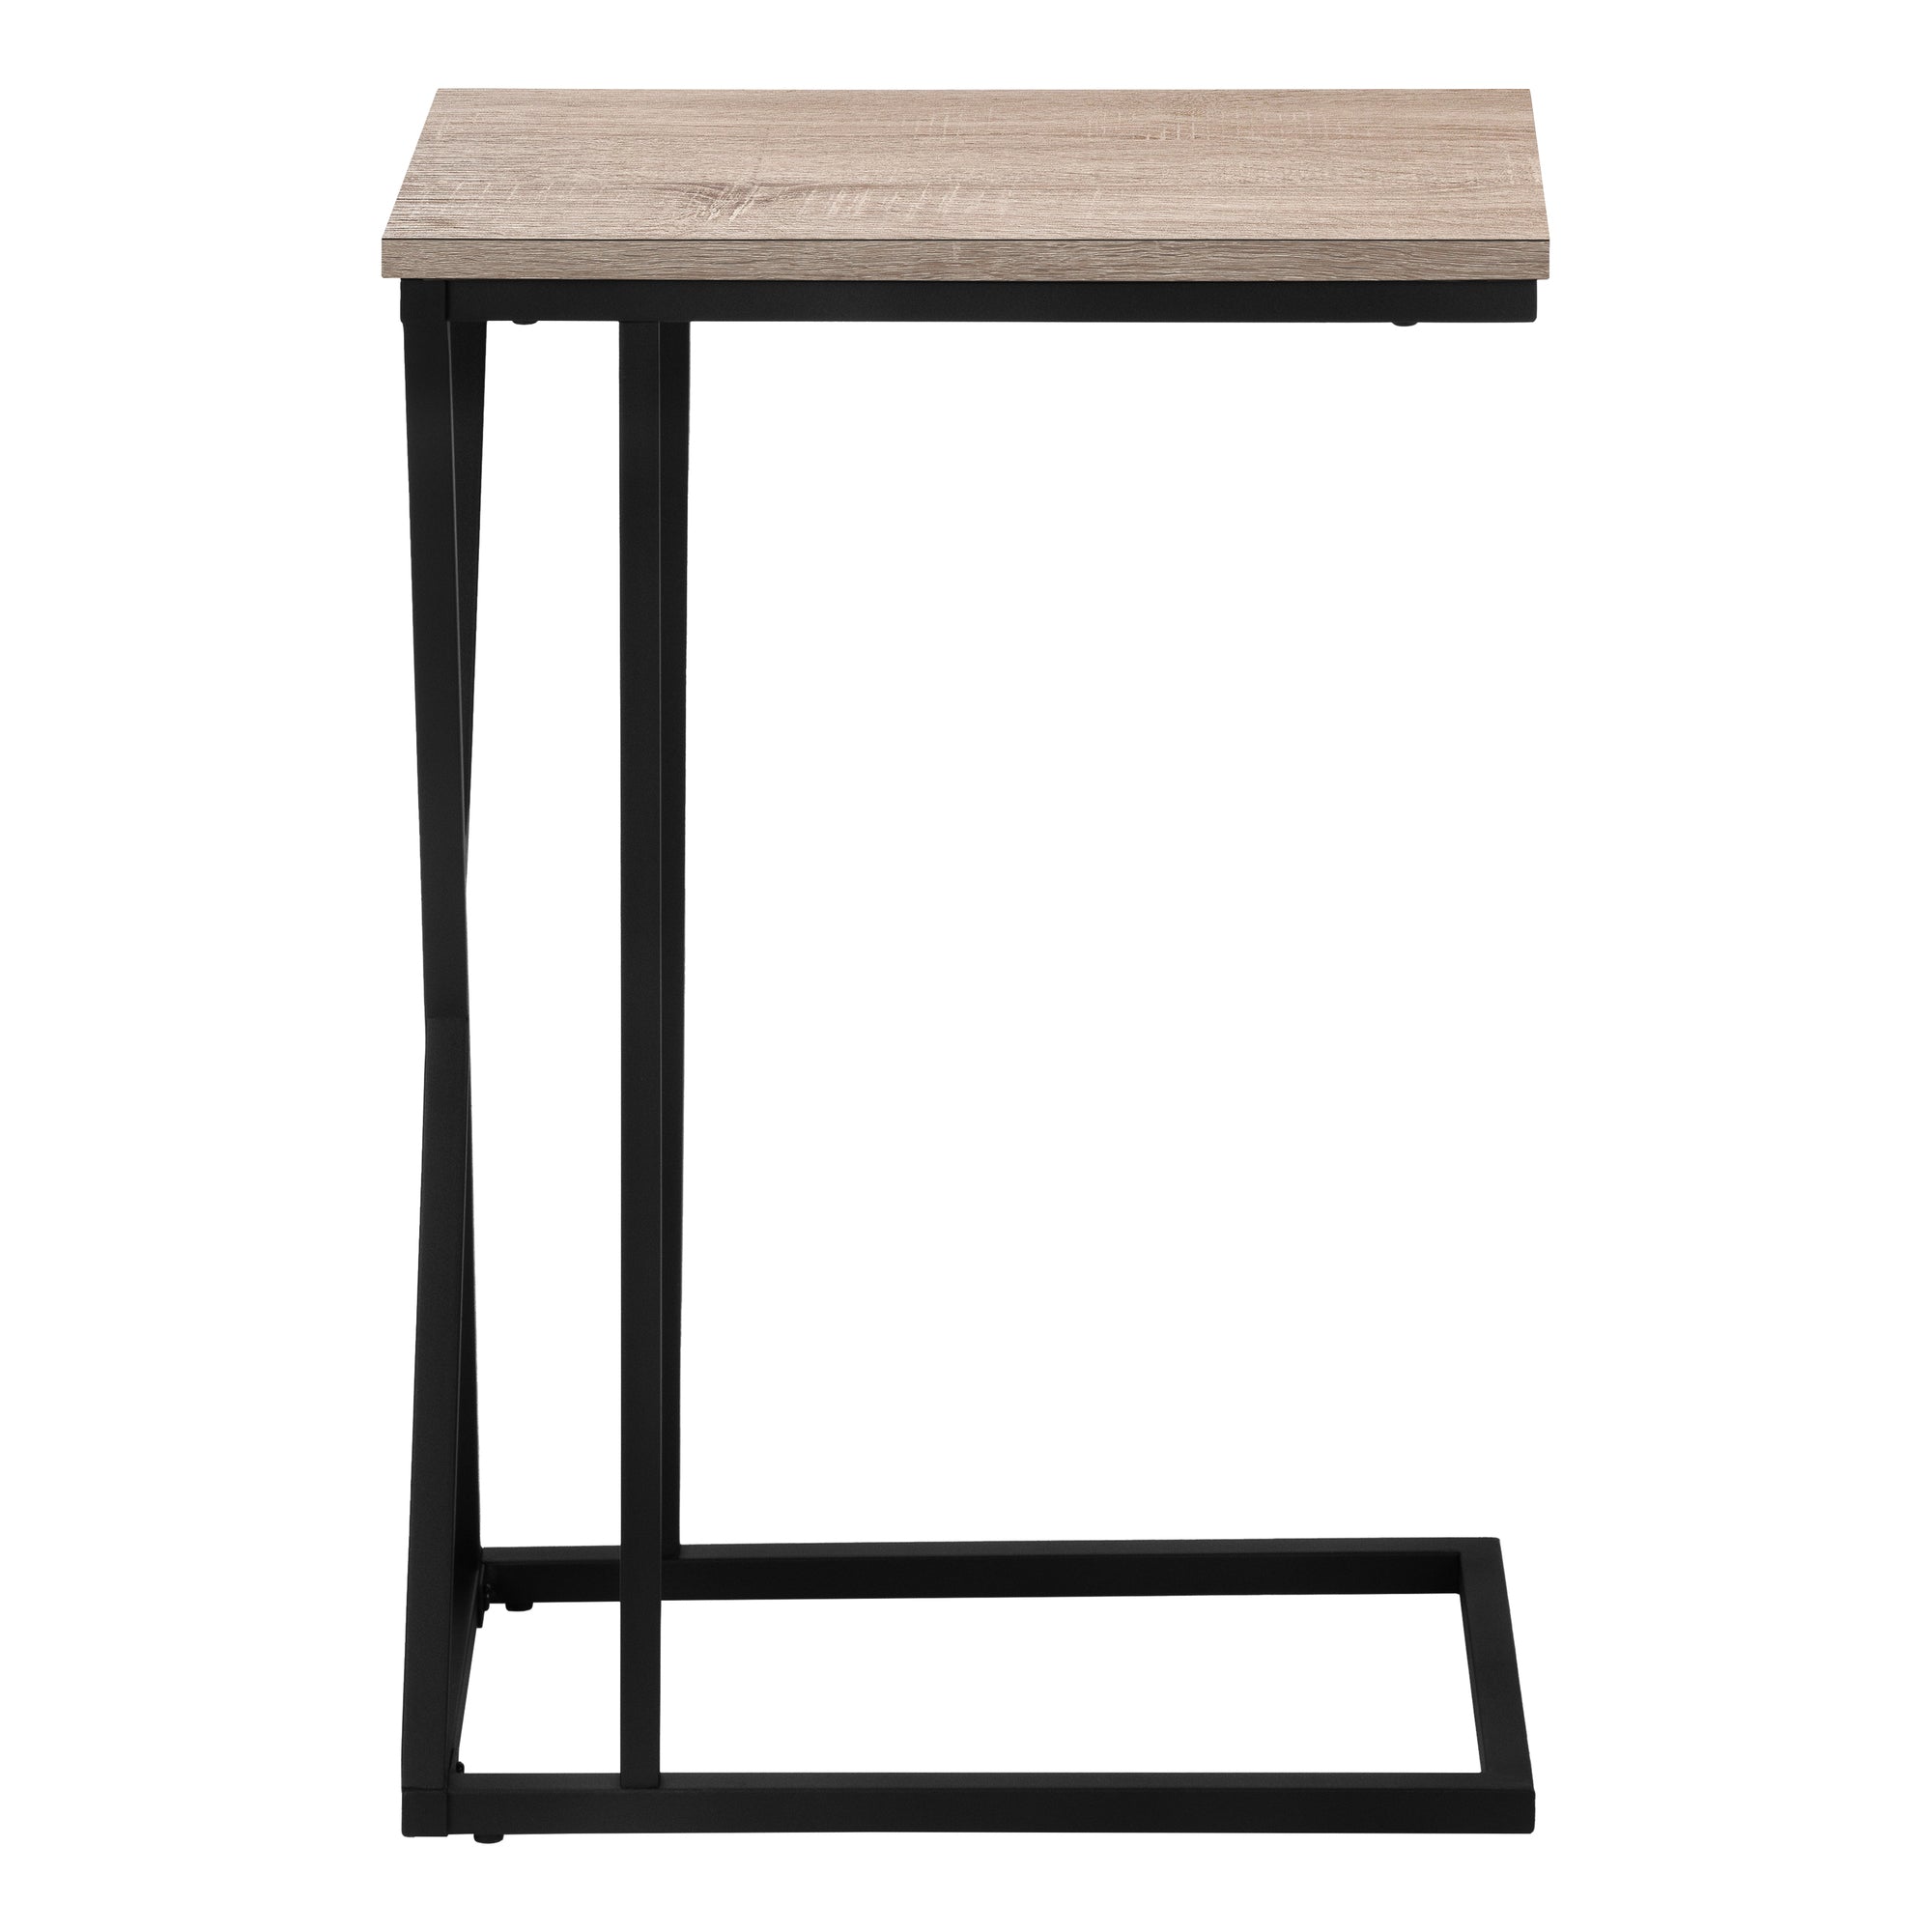 MN-863249    Accent Table, C-Shaped, End, Side, Snack, Living Room, Bedroom, Metal Legs, Laminate, Dark Taupe, Black, Contemporary, Modern